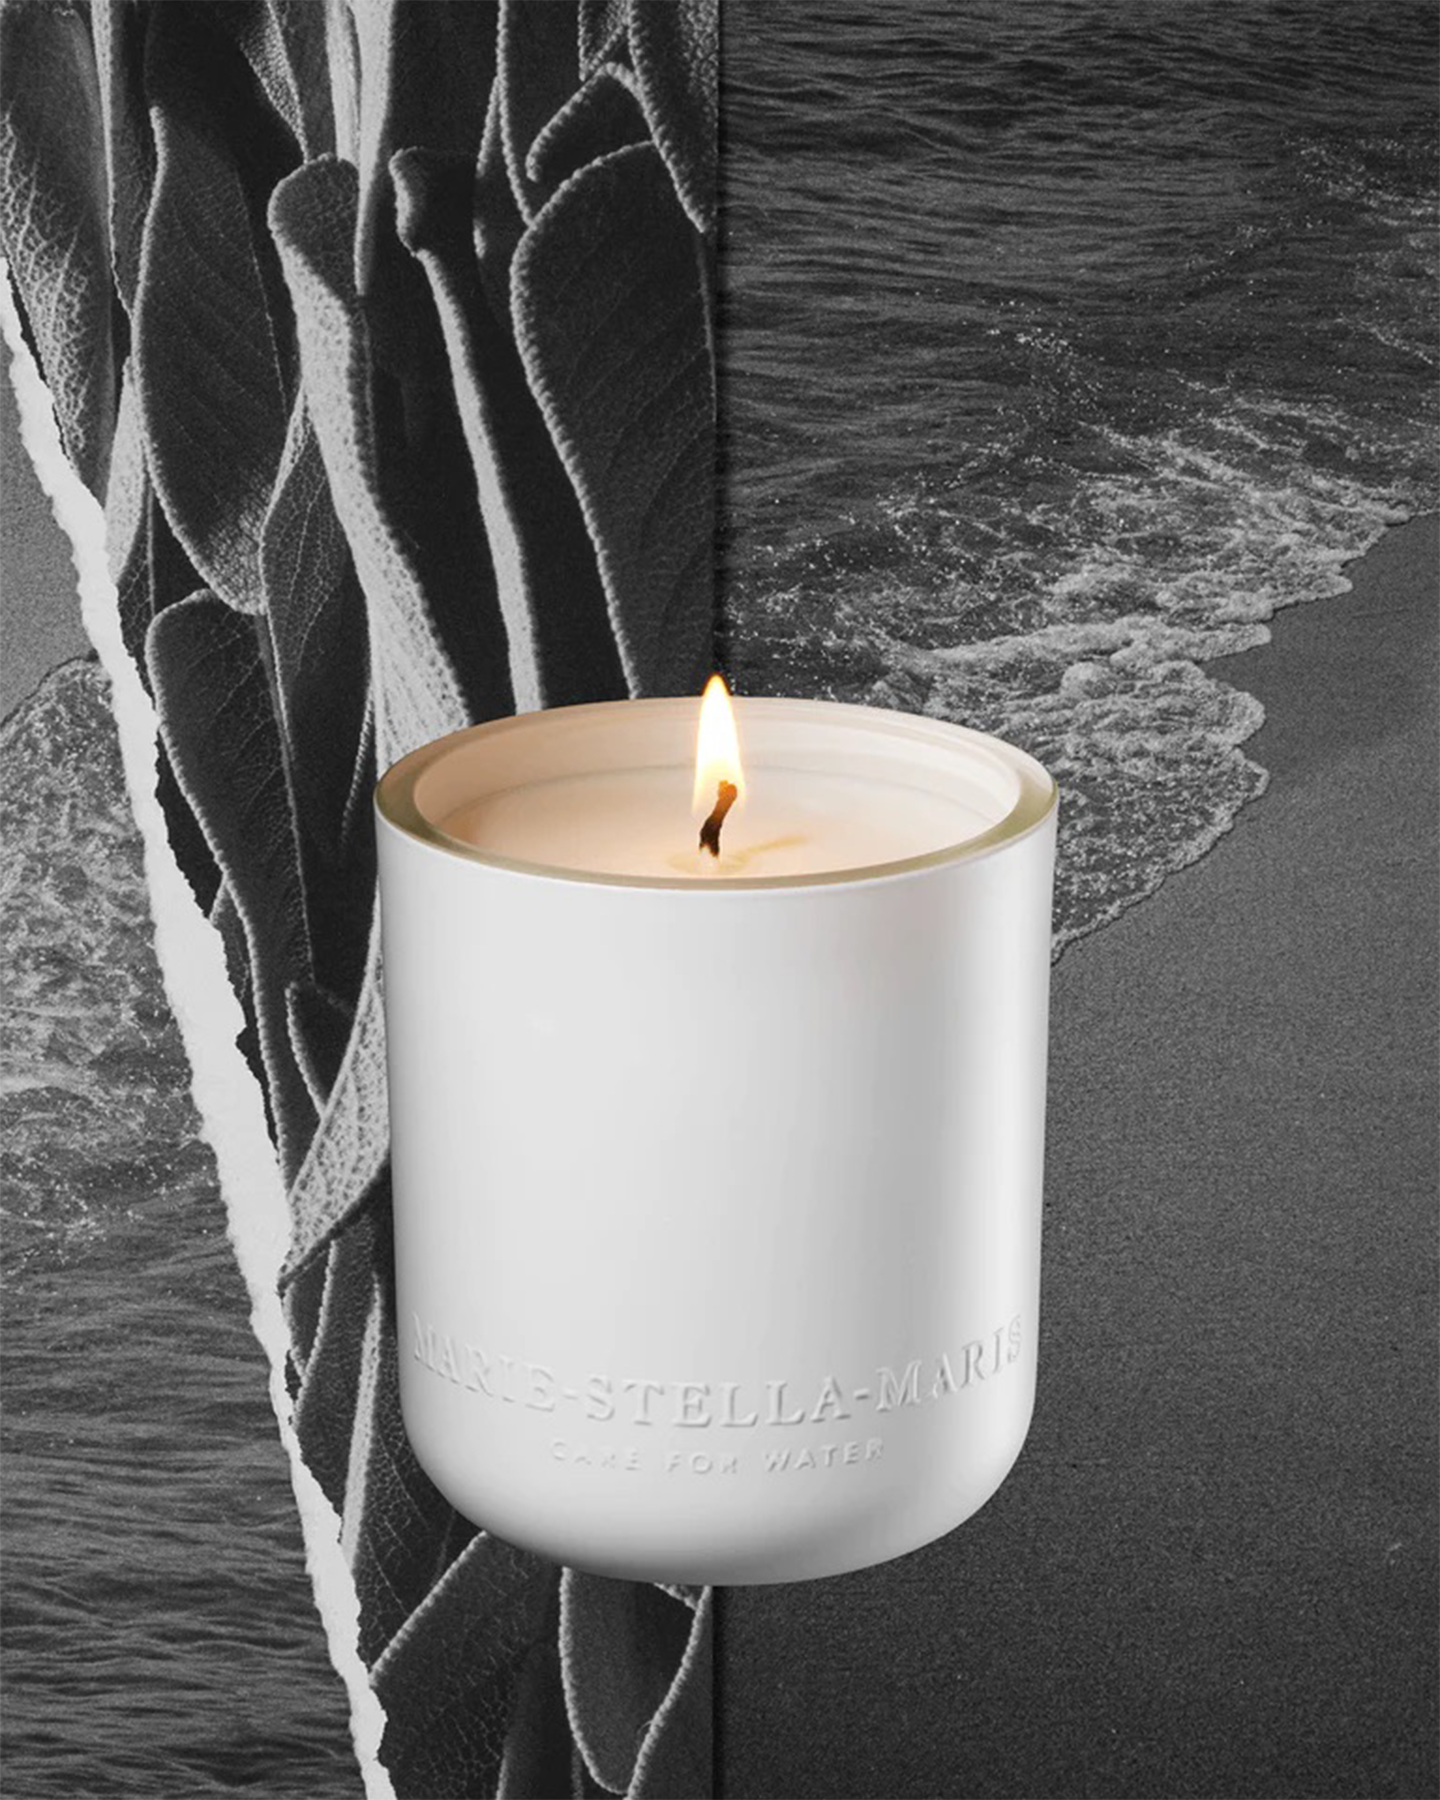 Marie-Stella-Maris Refillable Scented Candle Objets d'Amsterdam WIT 3